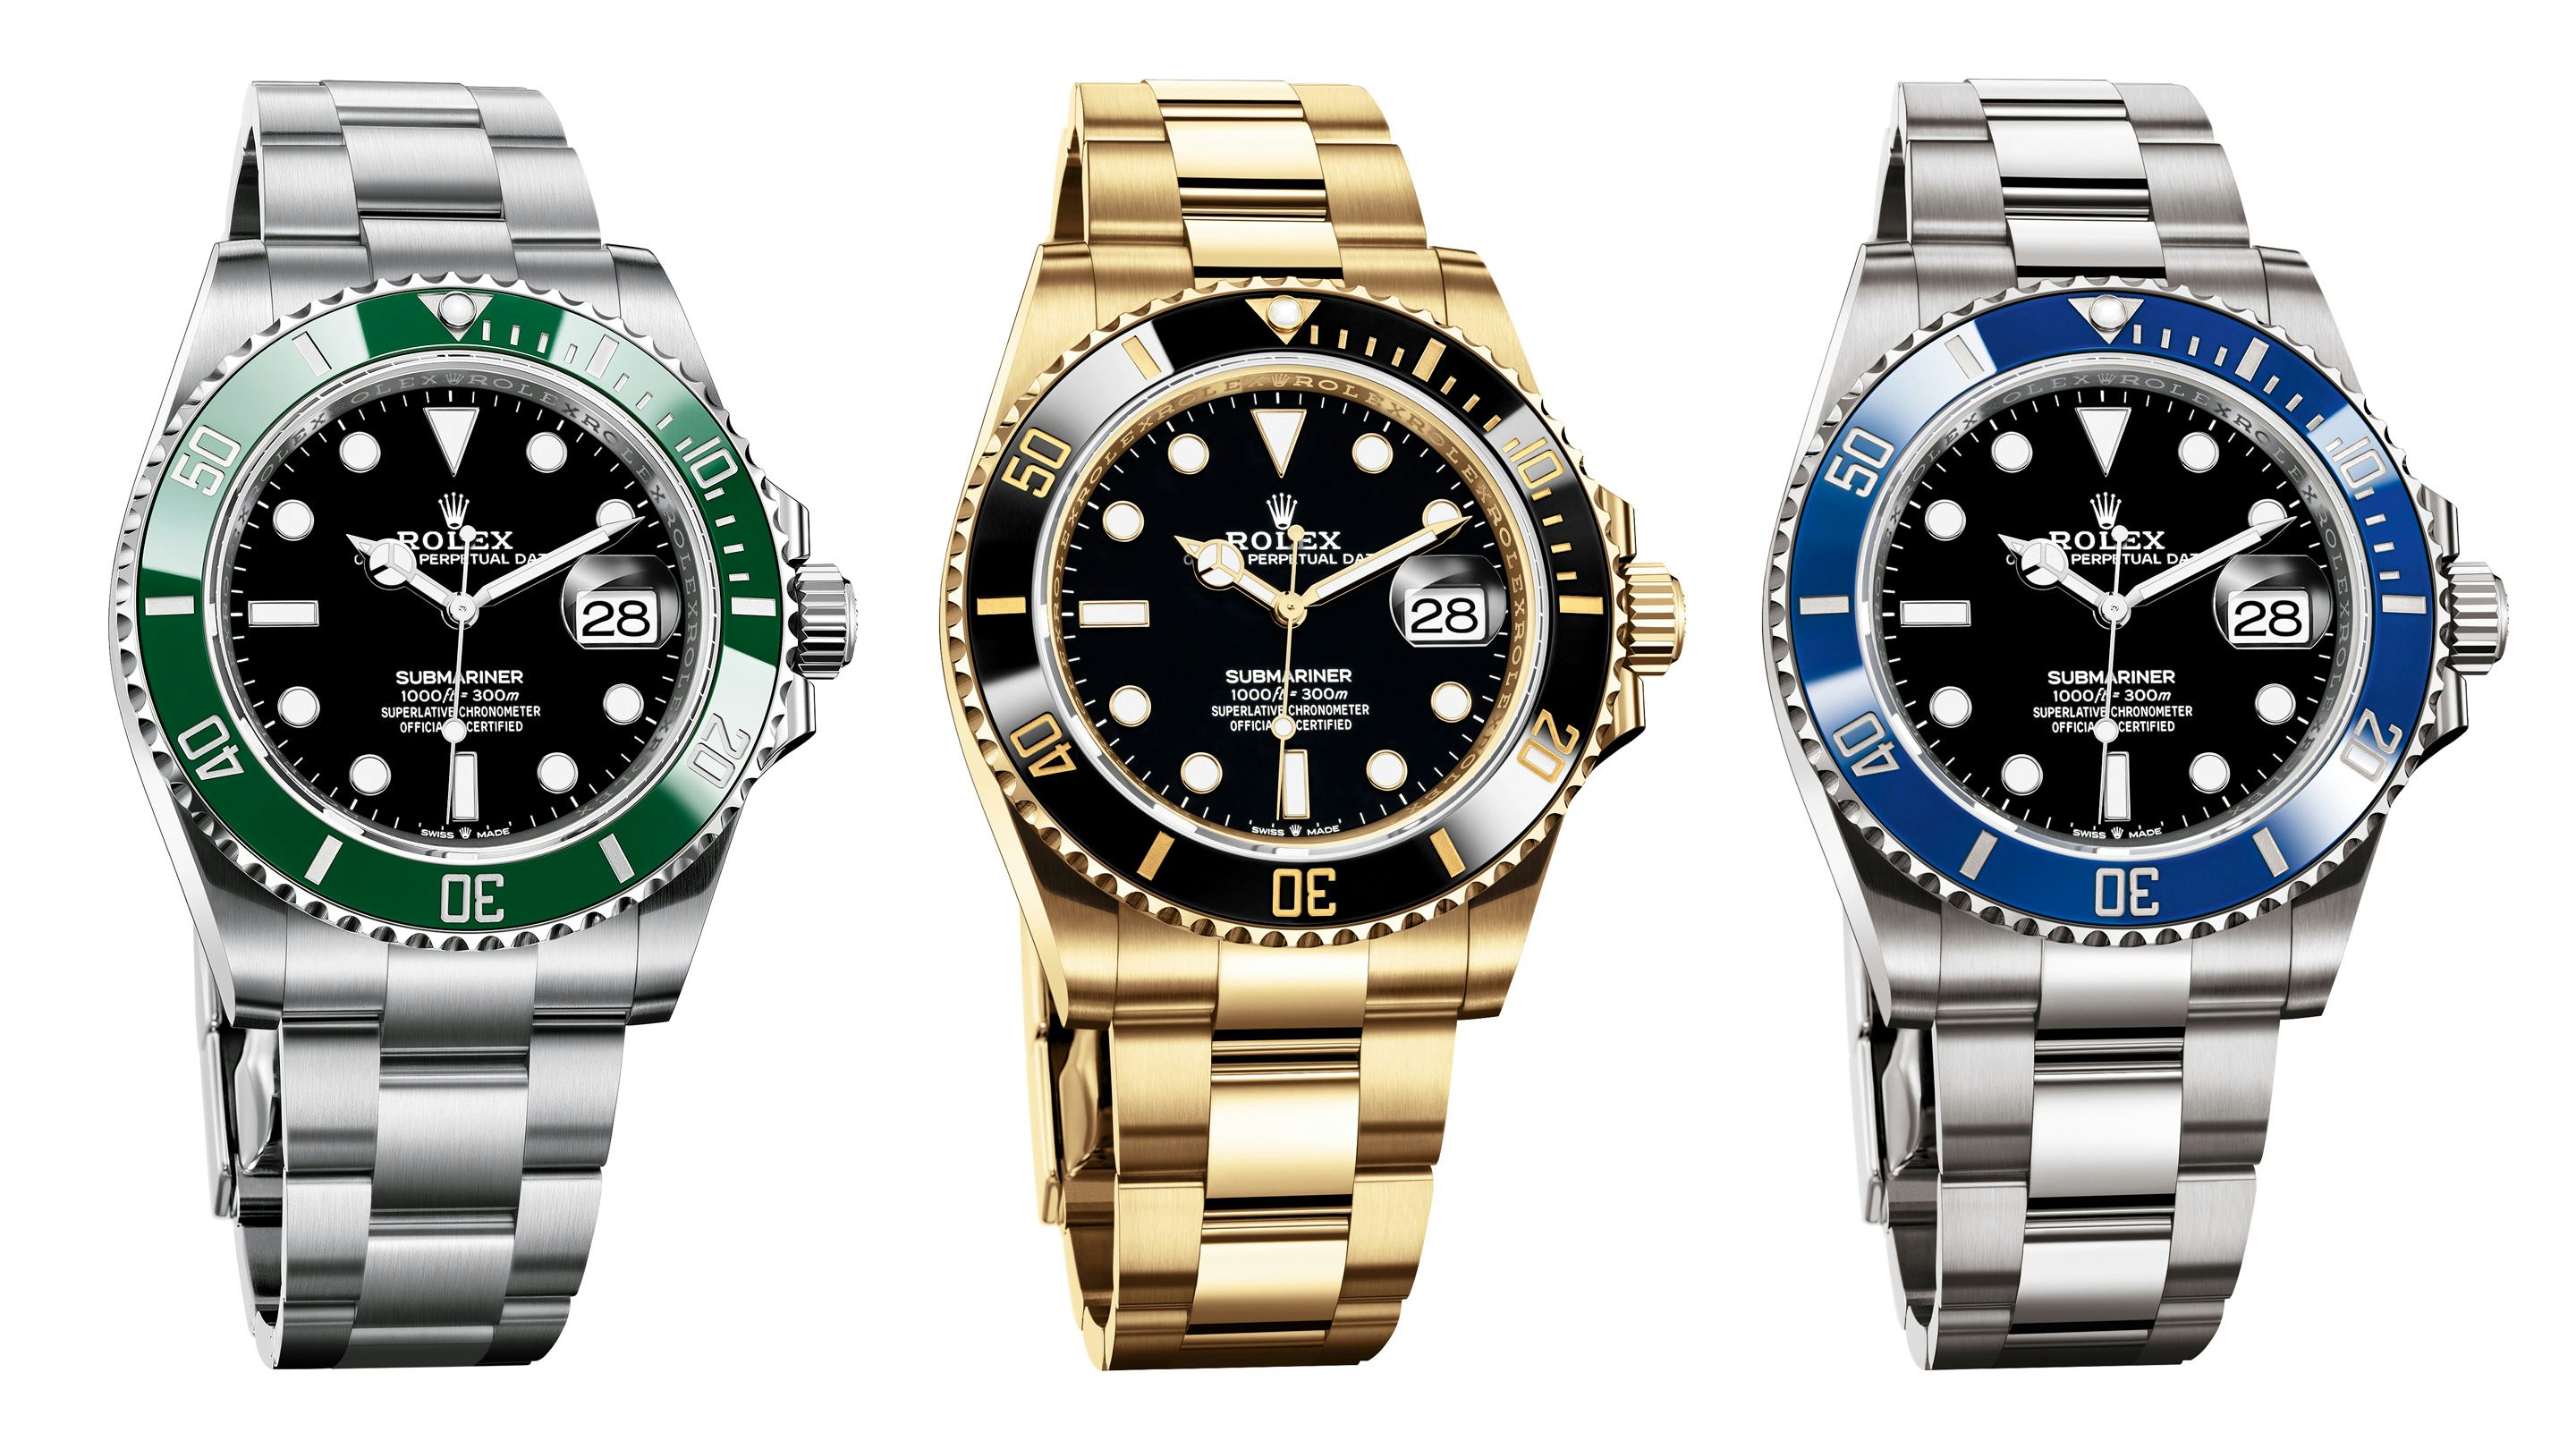 Introducing: The Rolex Submariner Date In 41mm (All Seven Variations) -